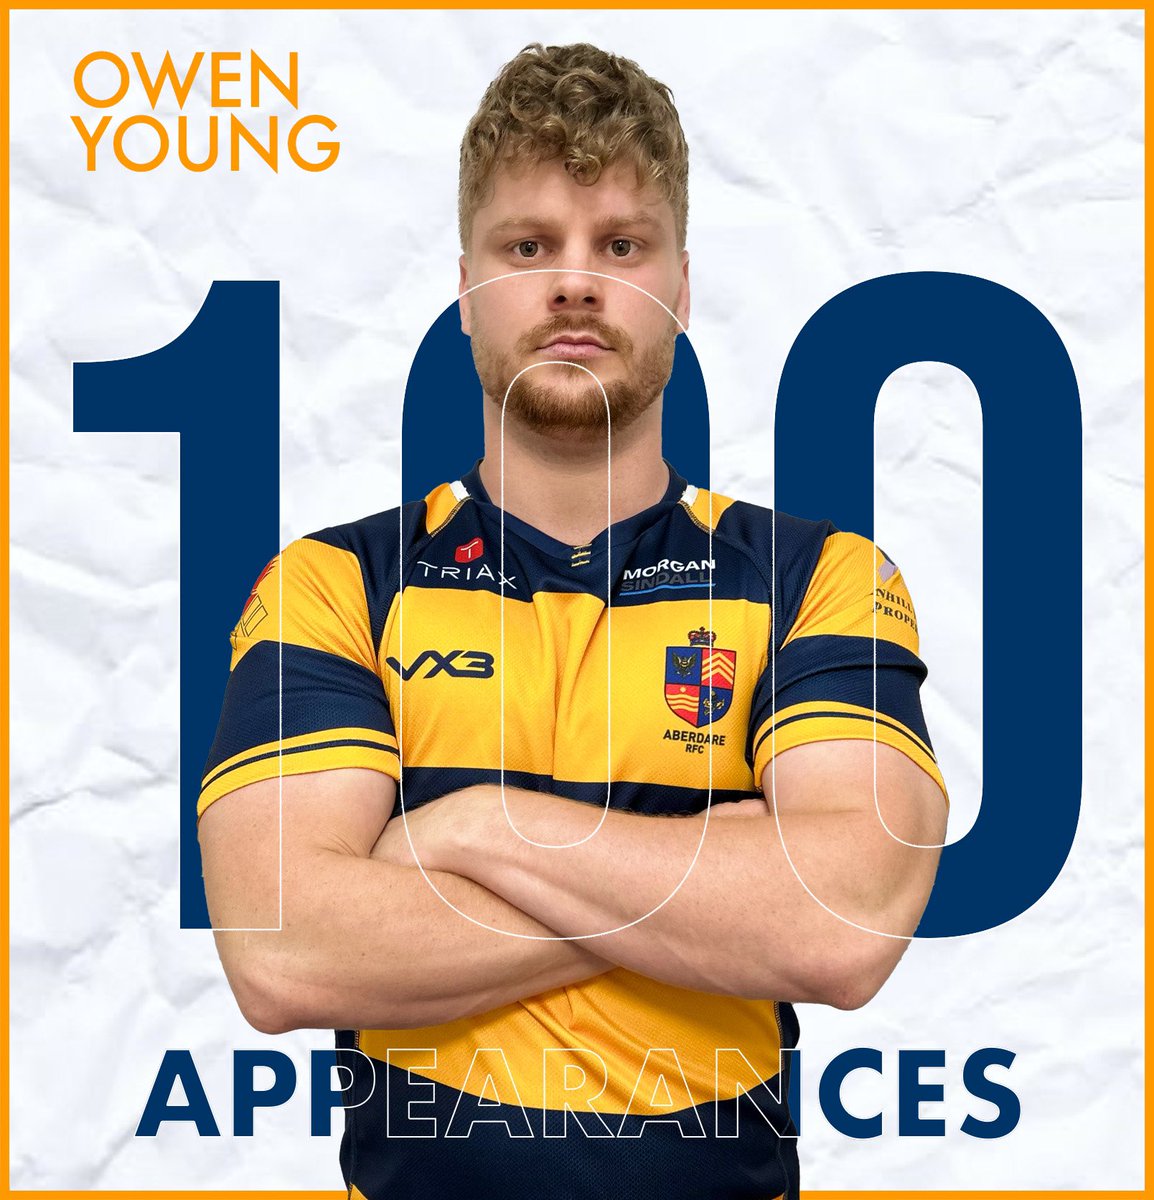 Congratulations to Owen Young who’ll make his 100th Senior appearance today for the club 💛💙🐍👏🏻